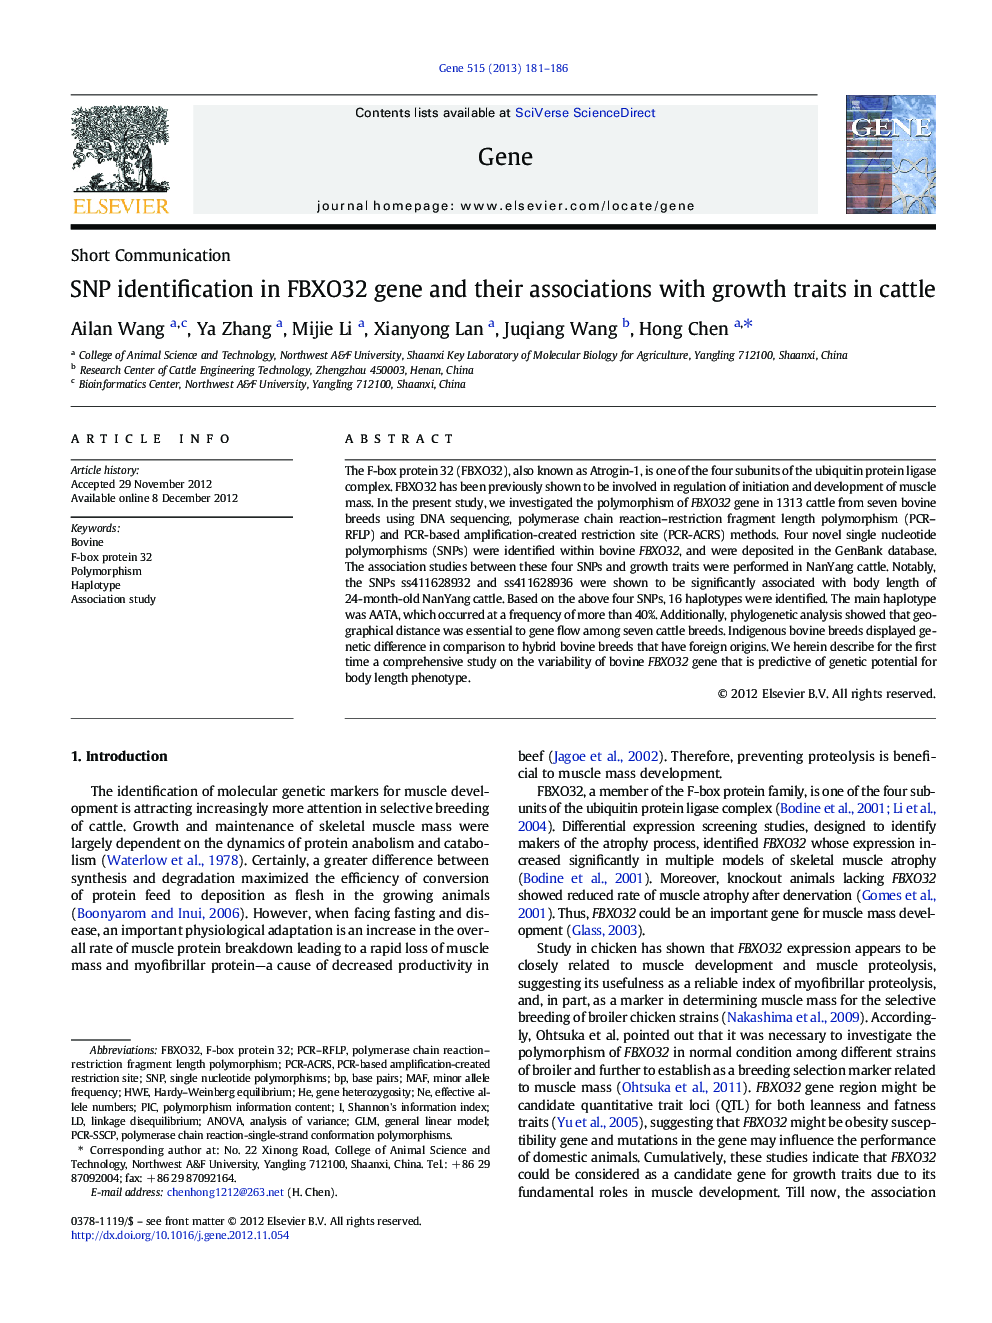 SNP identification in FBXO32 gene and their associations with growth traits in cattle